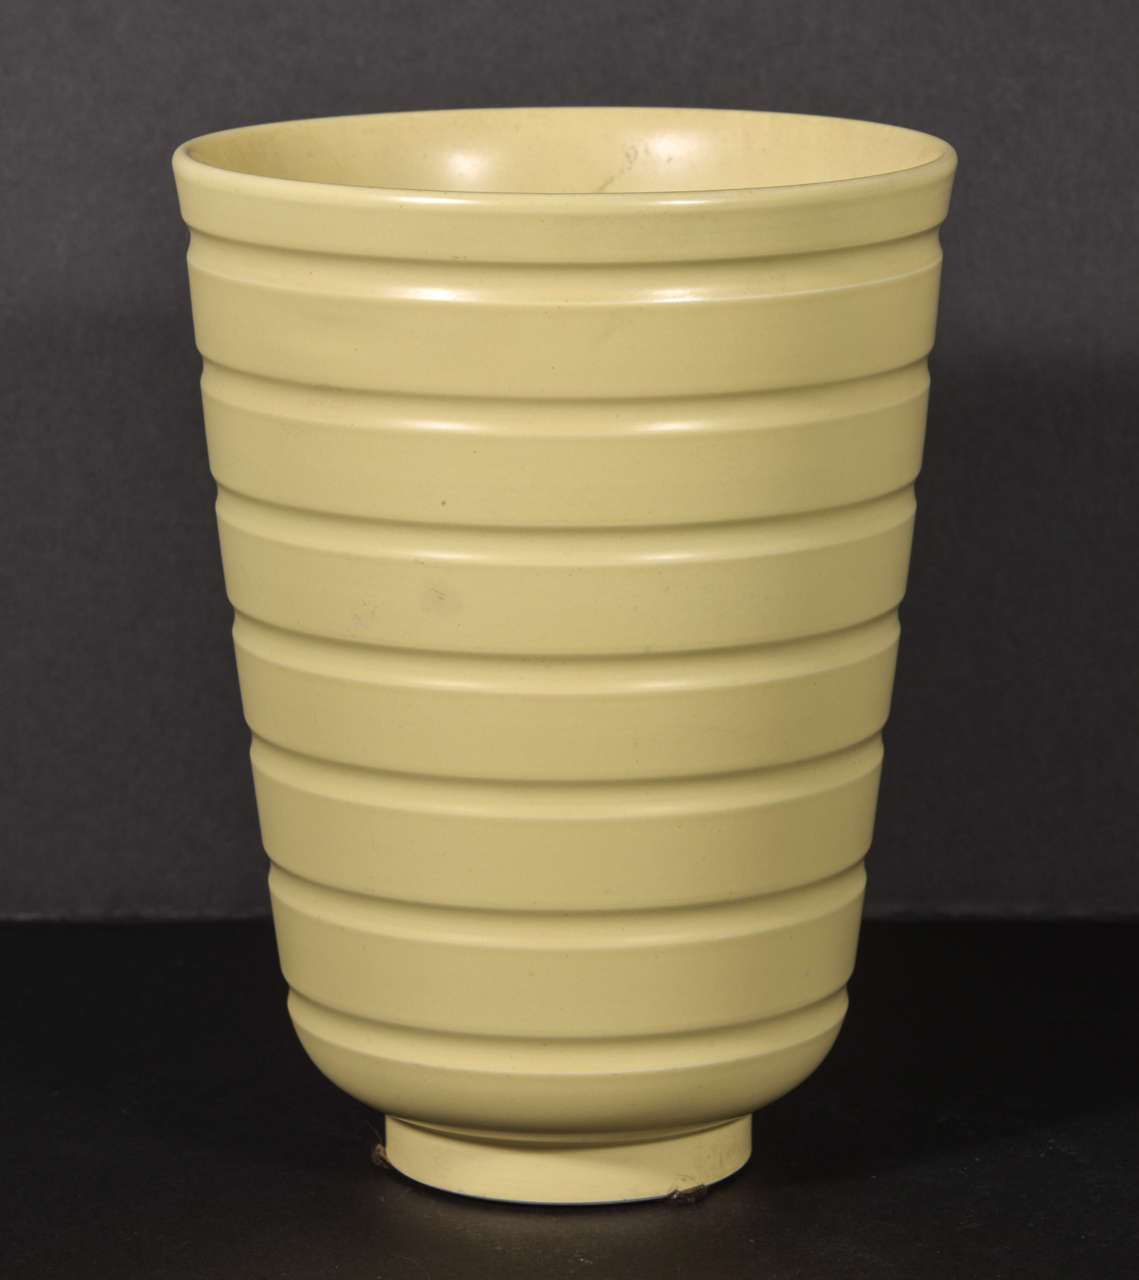 British Keith Murray for Wedgewood collection art deco vases